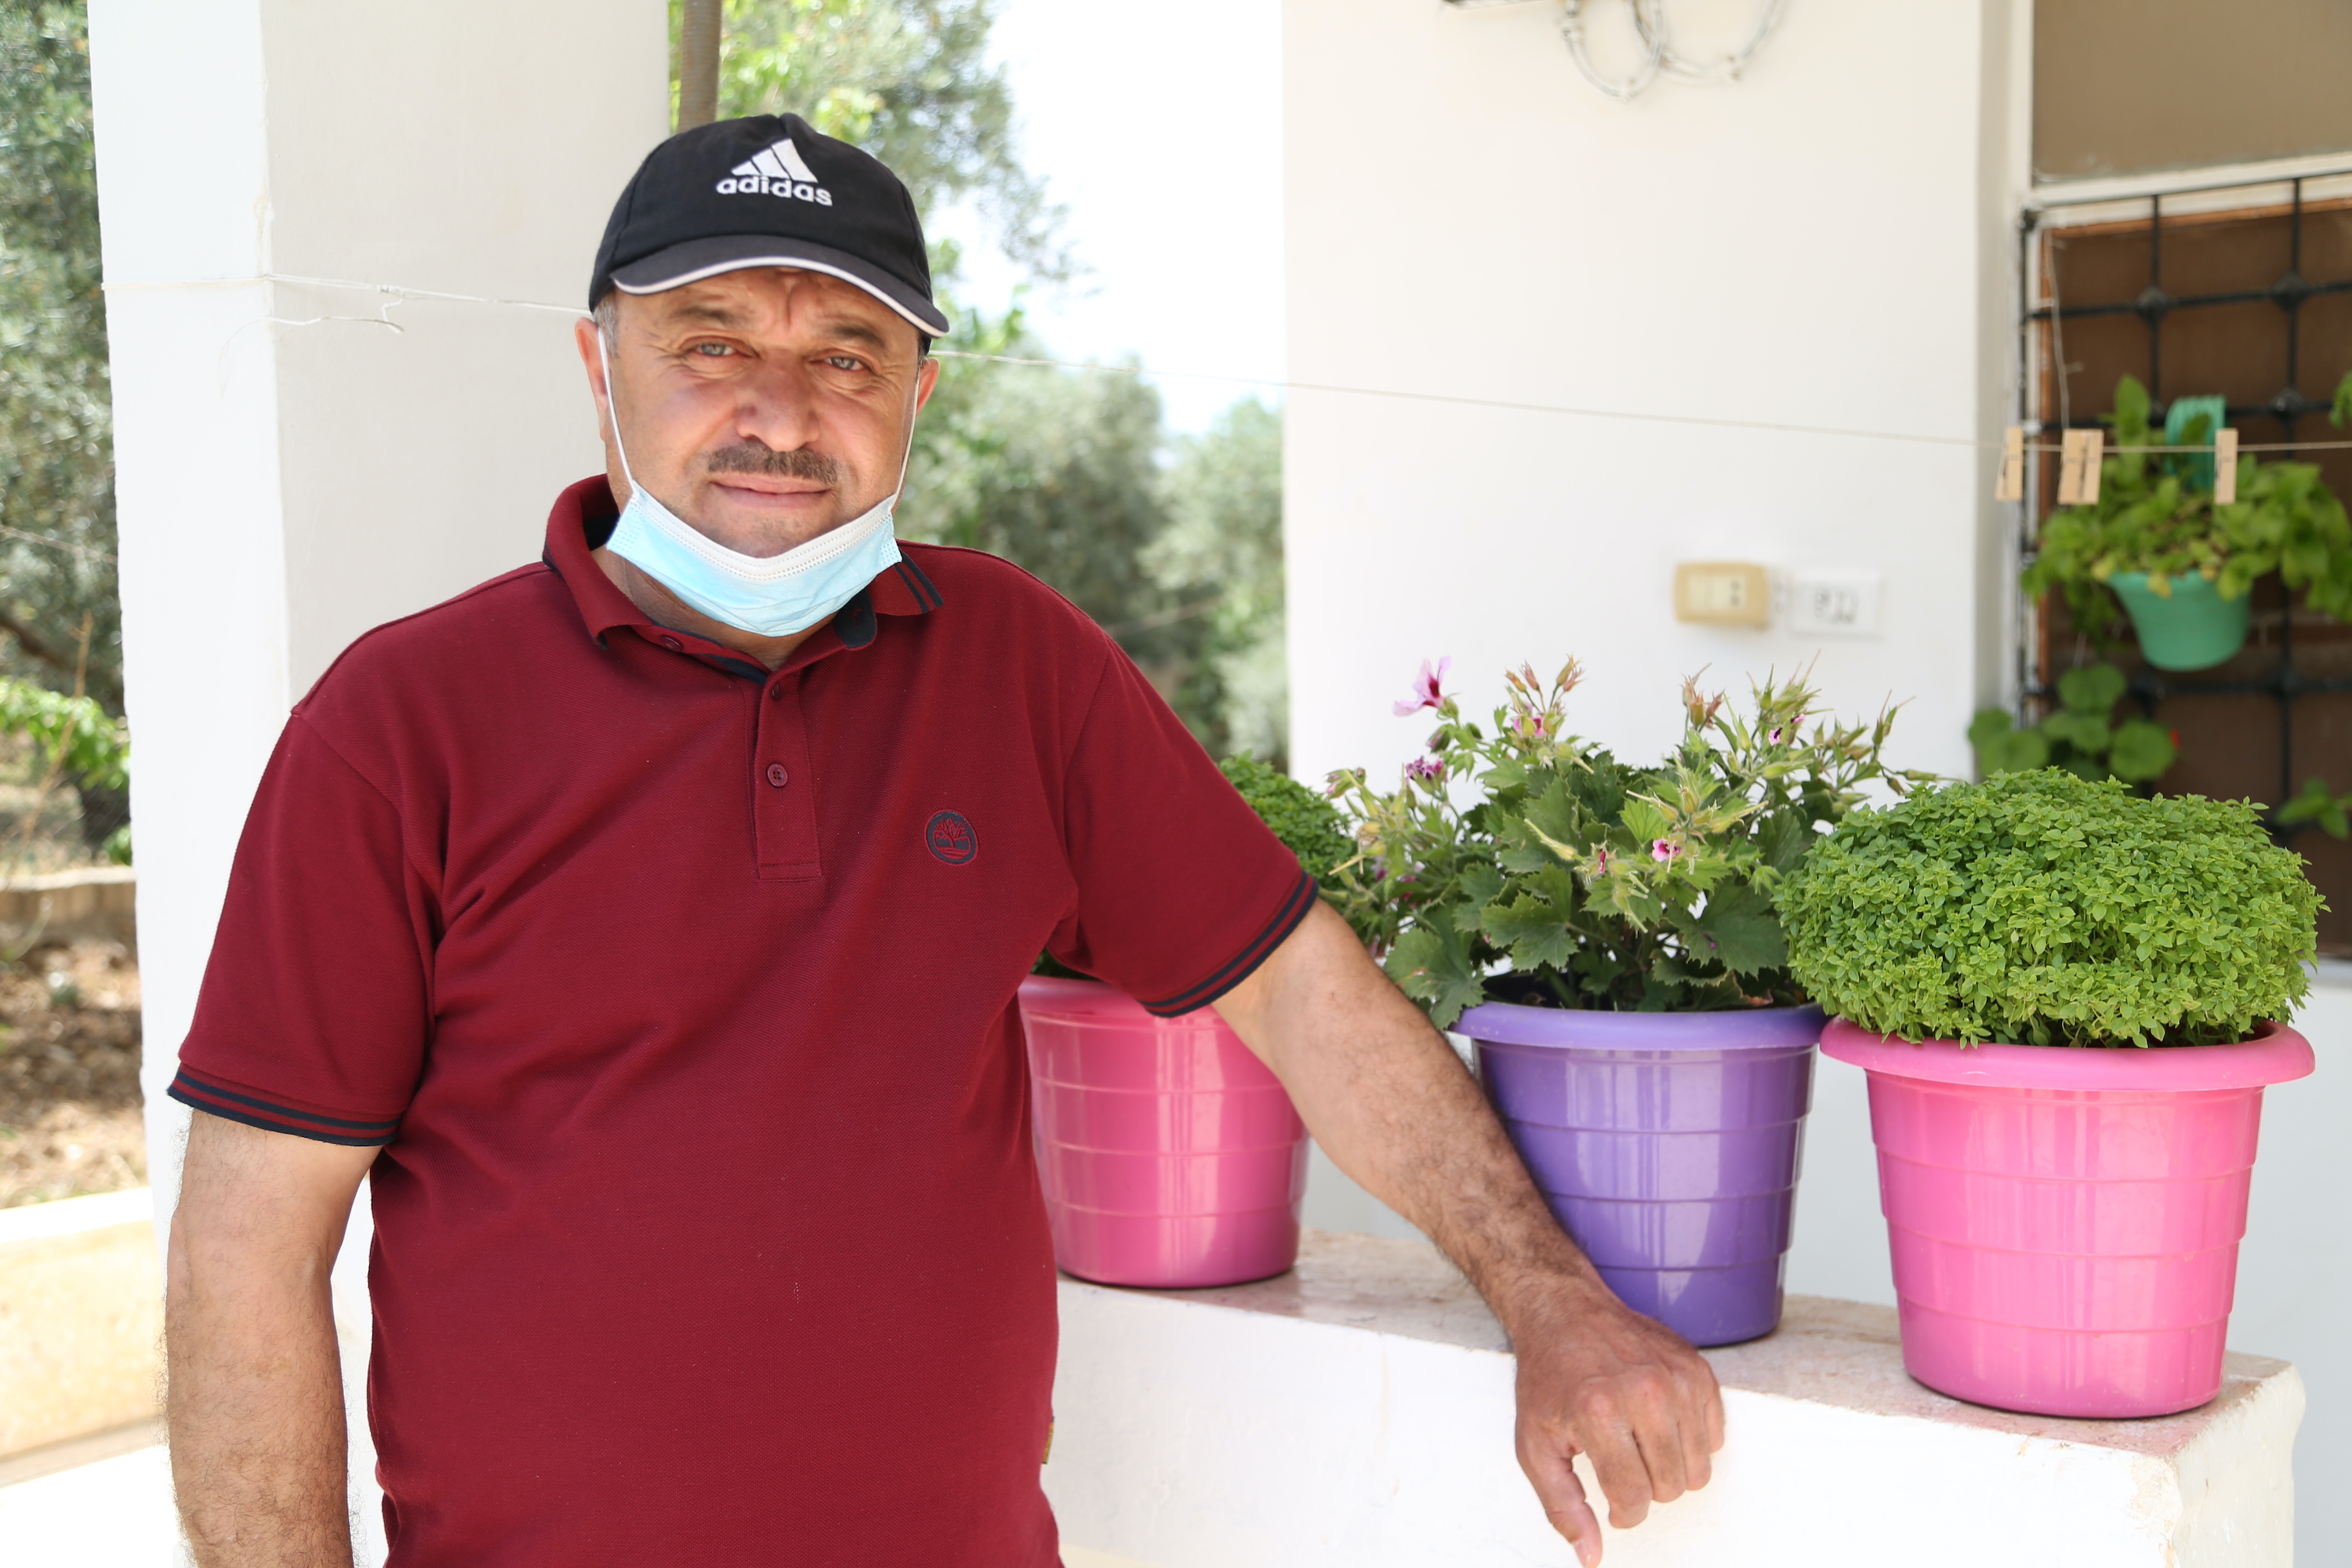 Mohammed, 49, standing in his house's porch